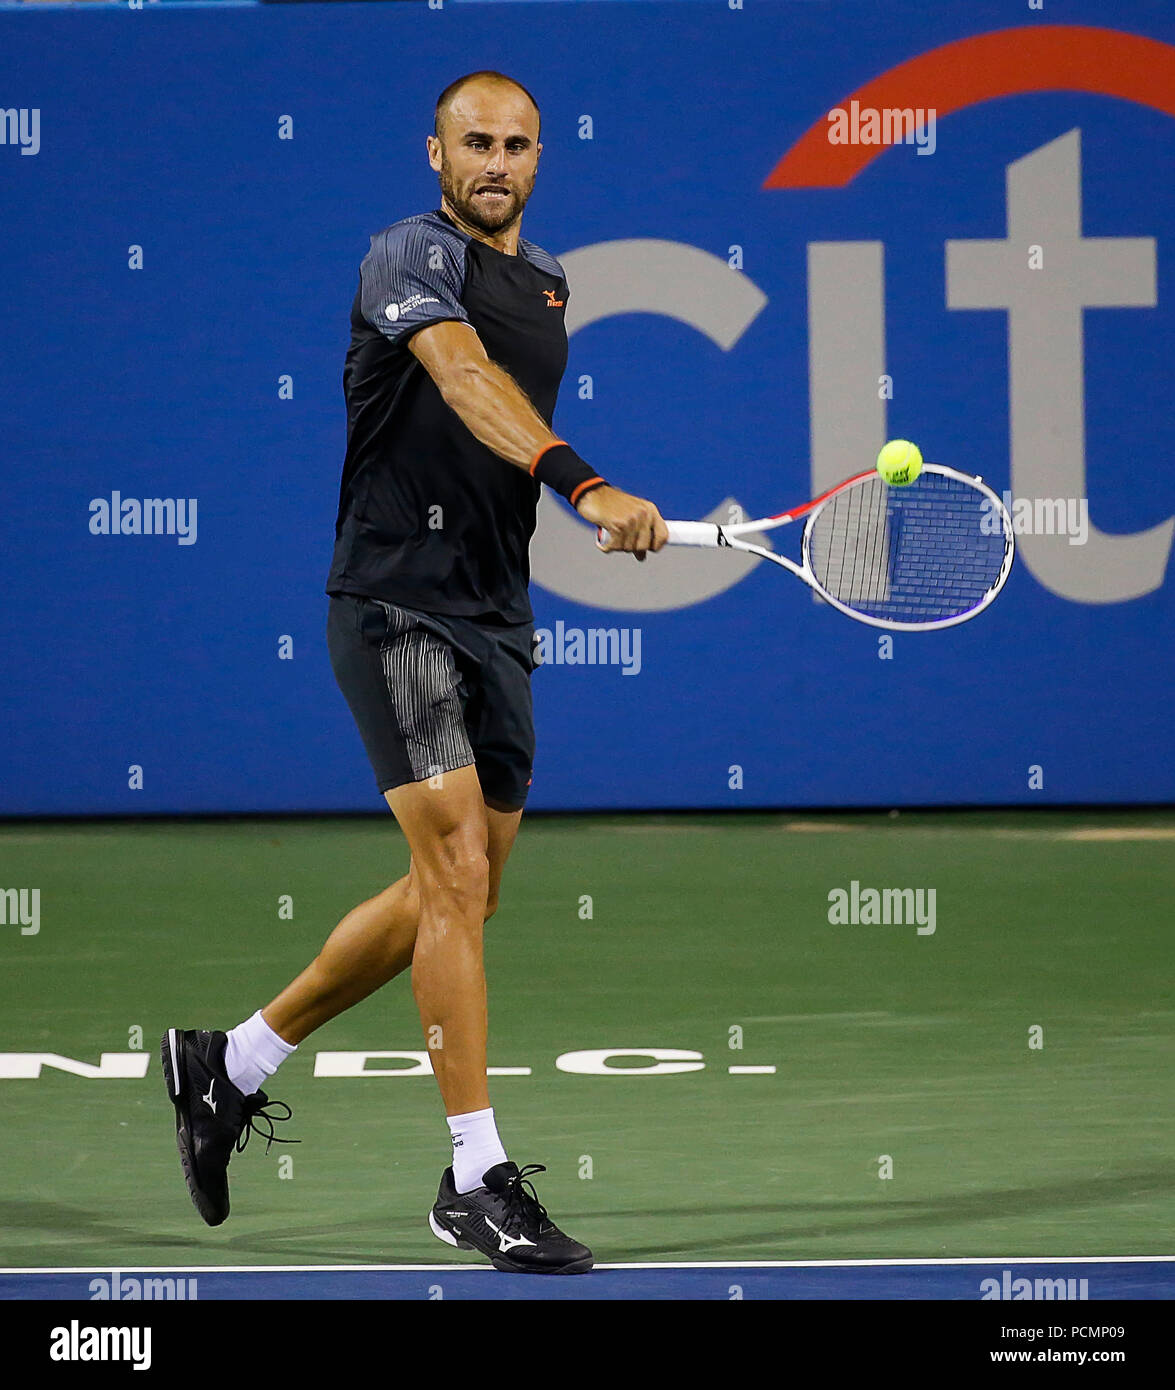 August 2, 2018: Marius Copil plays a shot during a Citi Open tennis match  at Rock Creek Park in Washington DC. Justin Cooper/CSM Stock Photo - Alamy